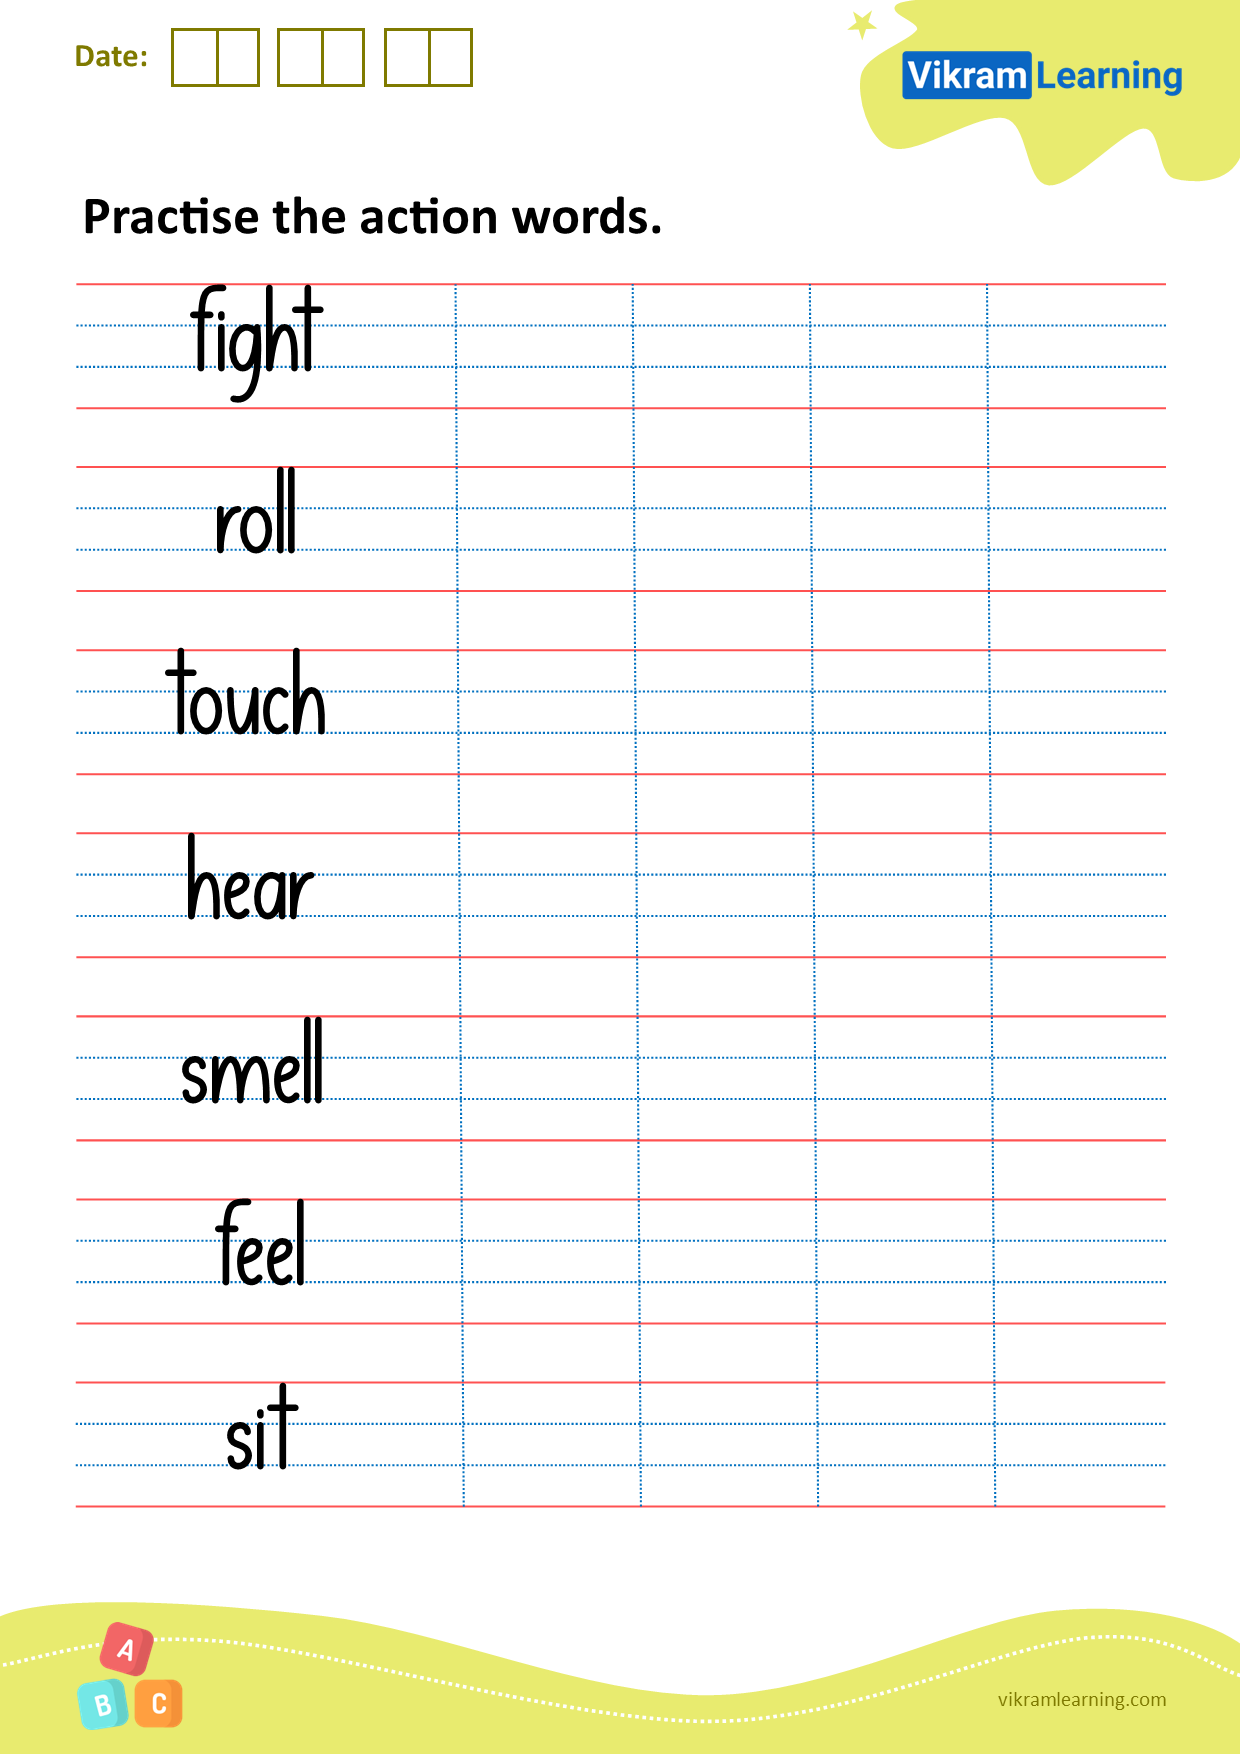 Download practice the action words worksheets